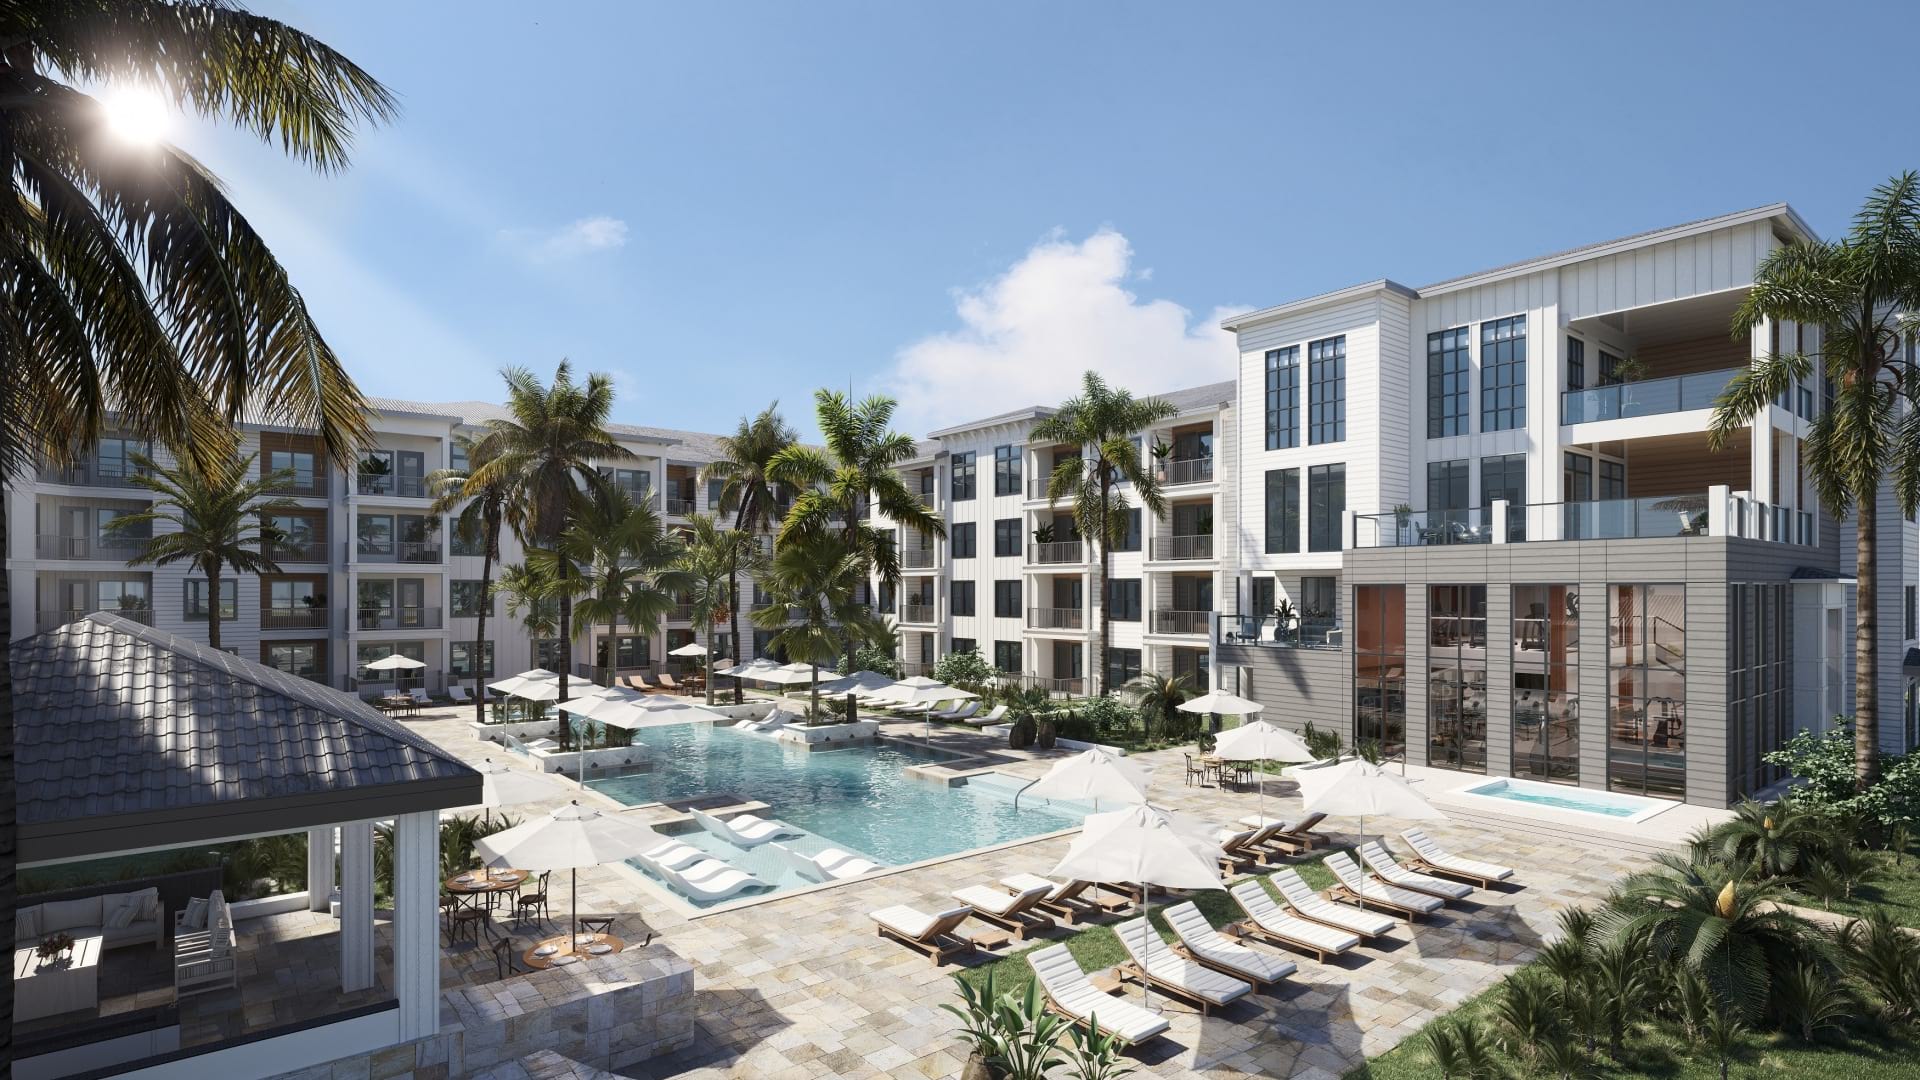 Coming Soon: Resort-Style Living in Riverview